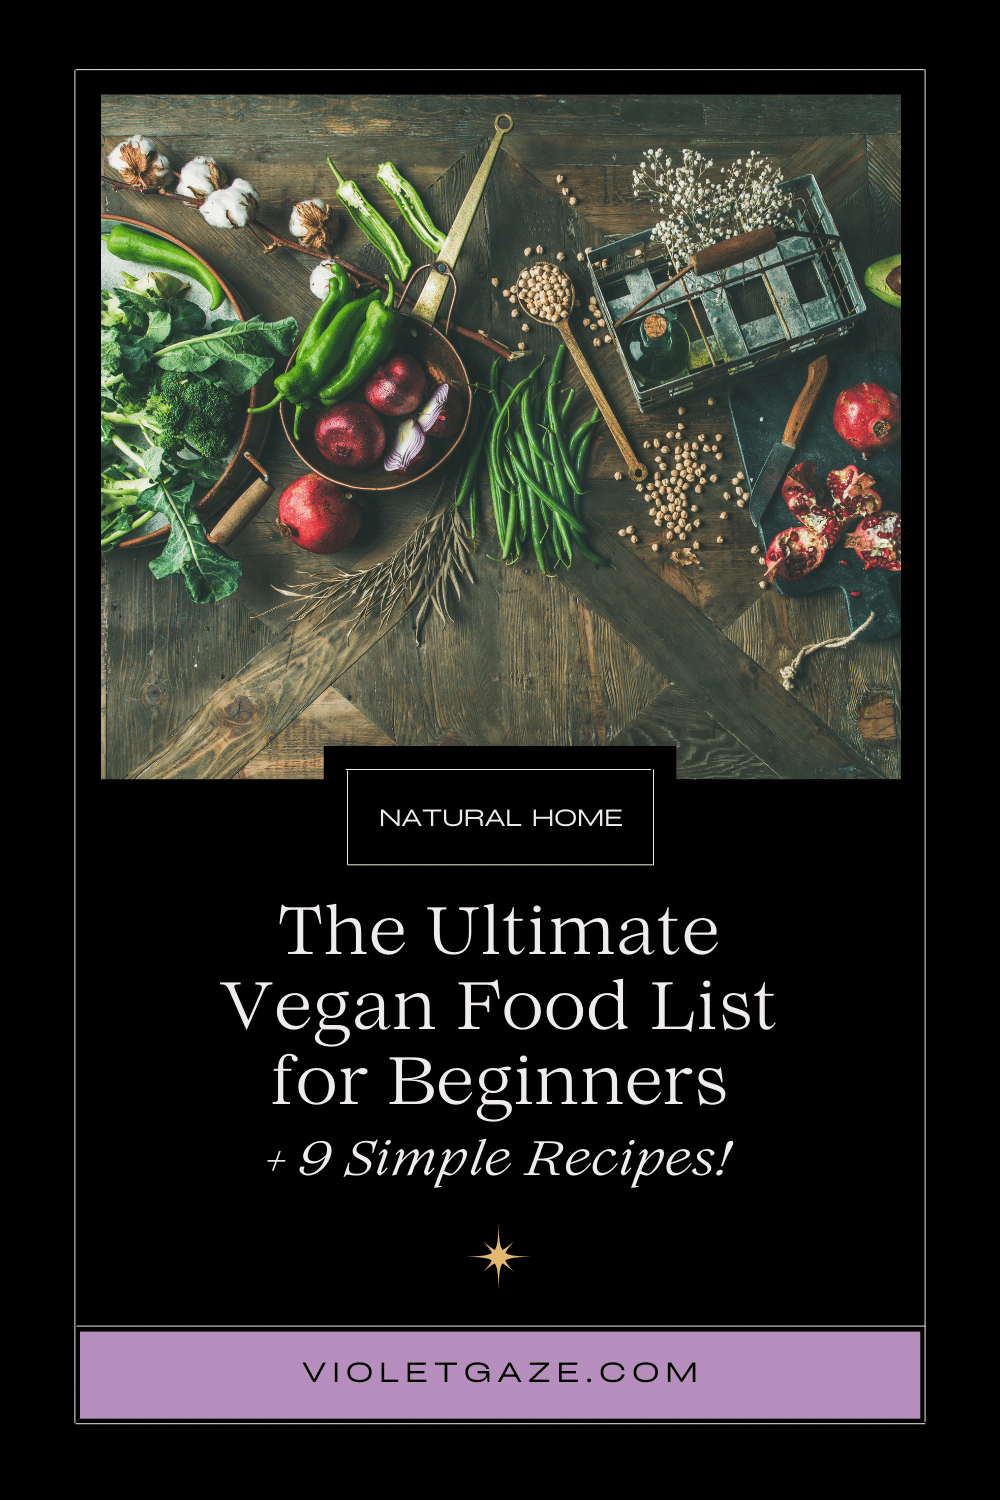 info graphic that says the ultimate vegan food list for beginners + 9 simple recipes with a picture of vegan food (fruits, vegetables, spices) being laid out on a table